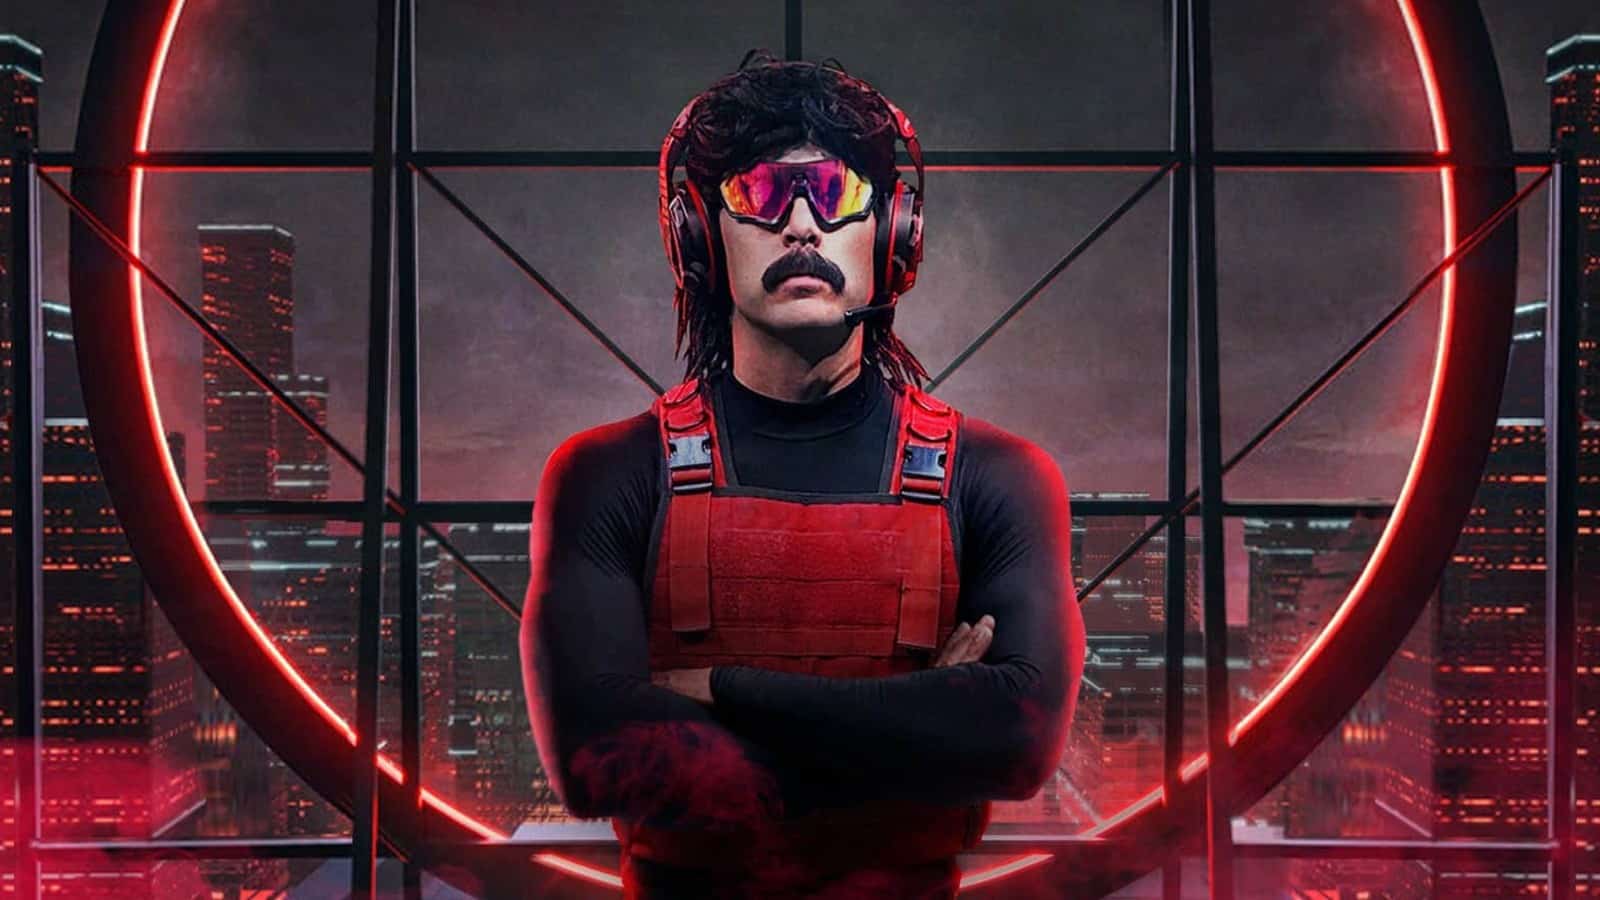 Dr Disrespect streaming in front of screen